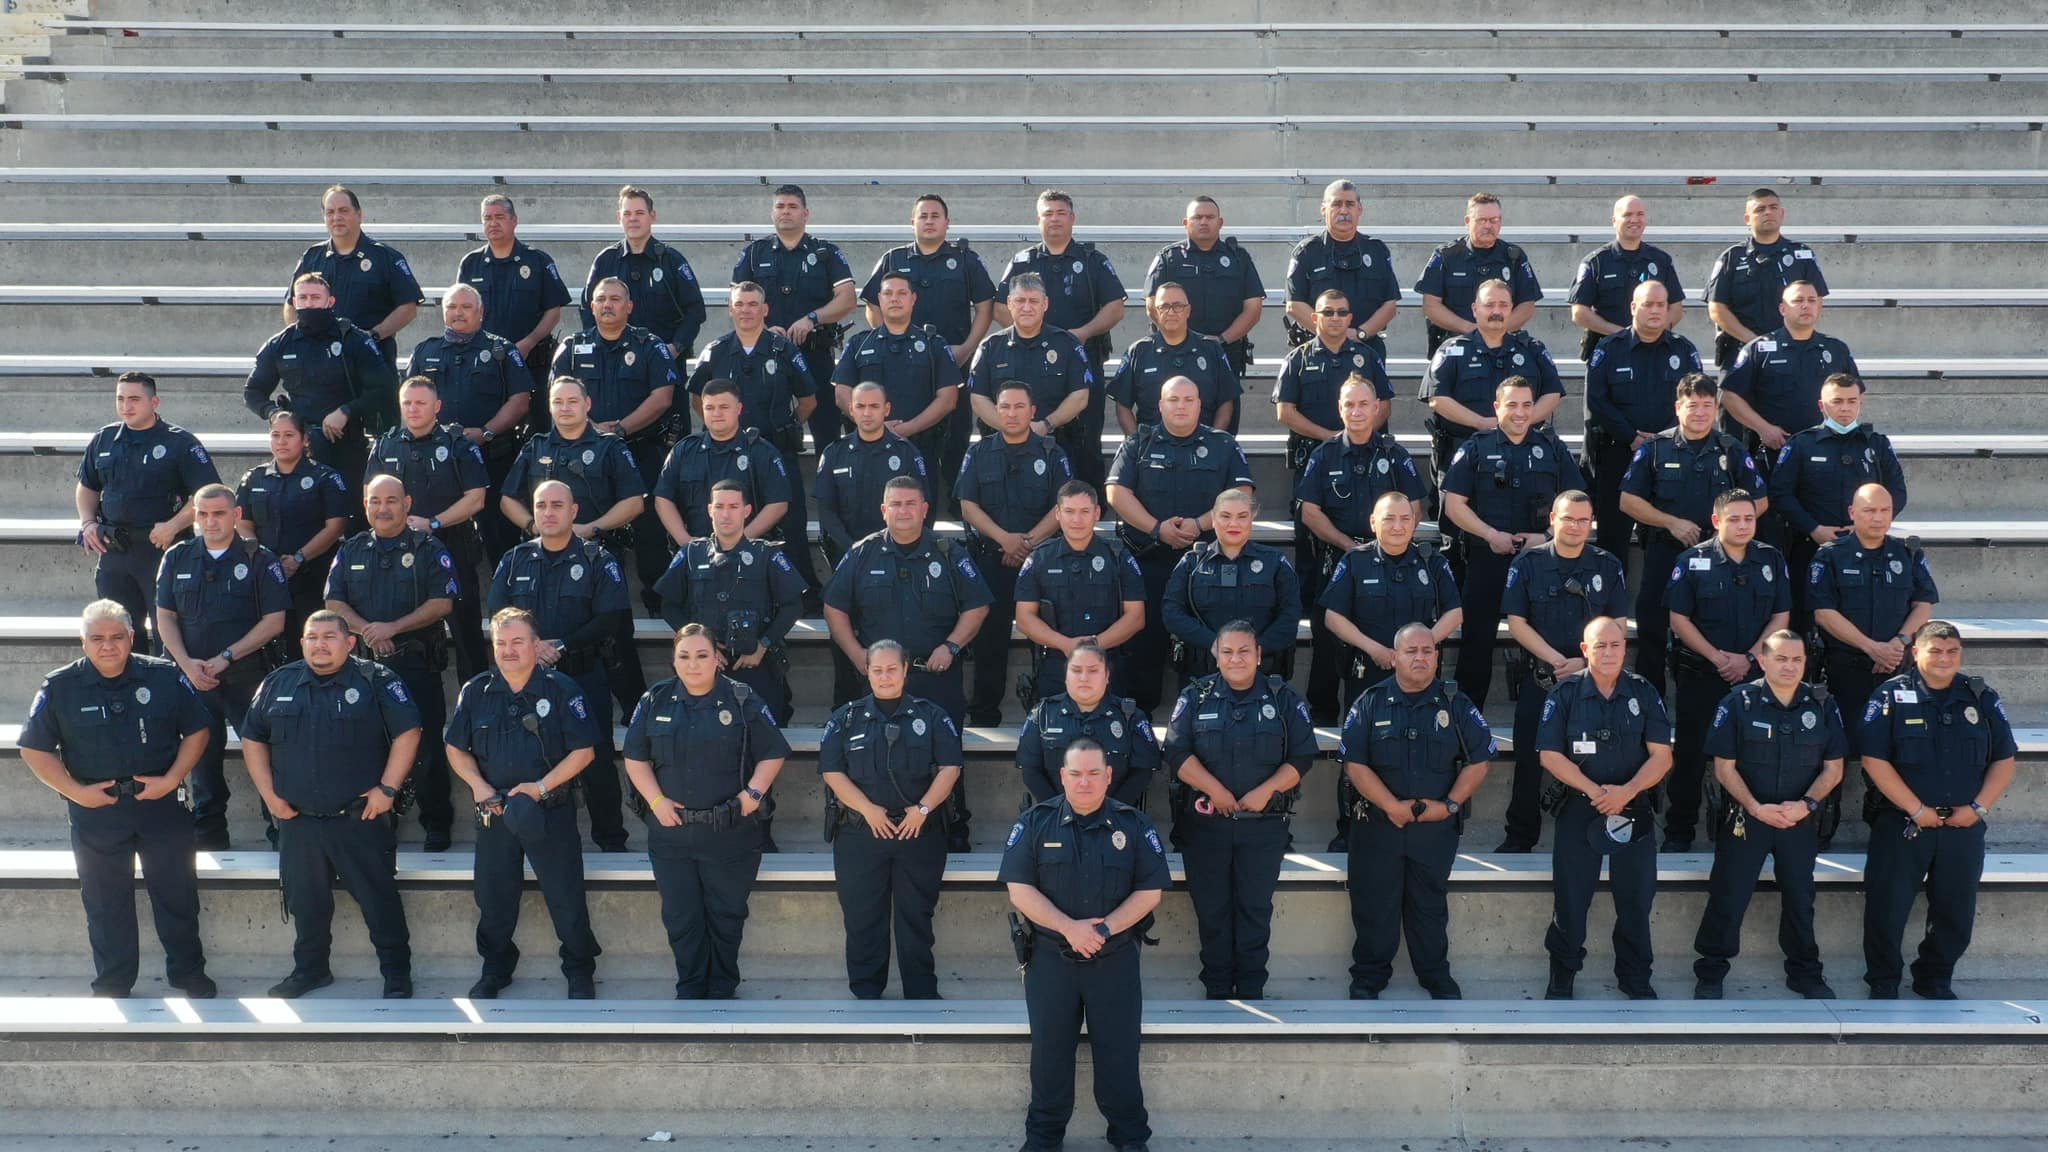 McAllen Police Officers group photo